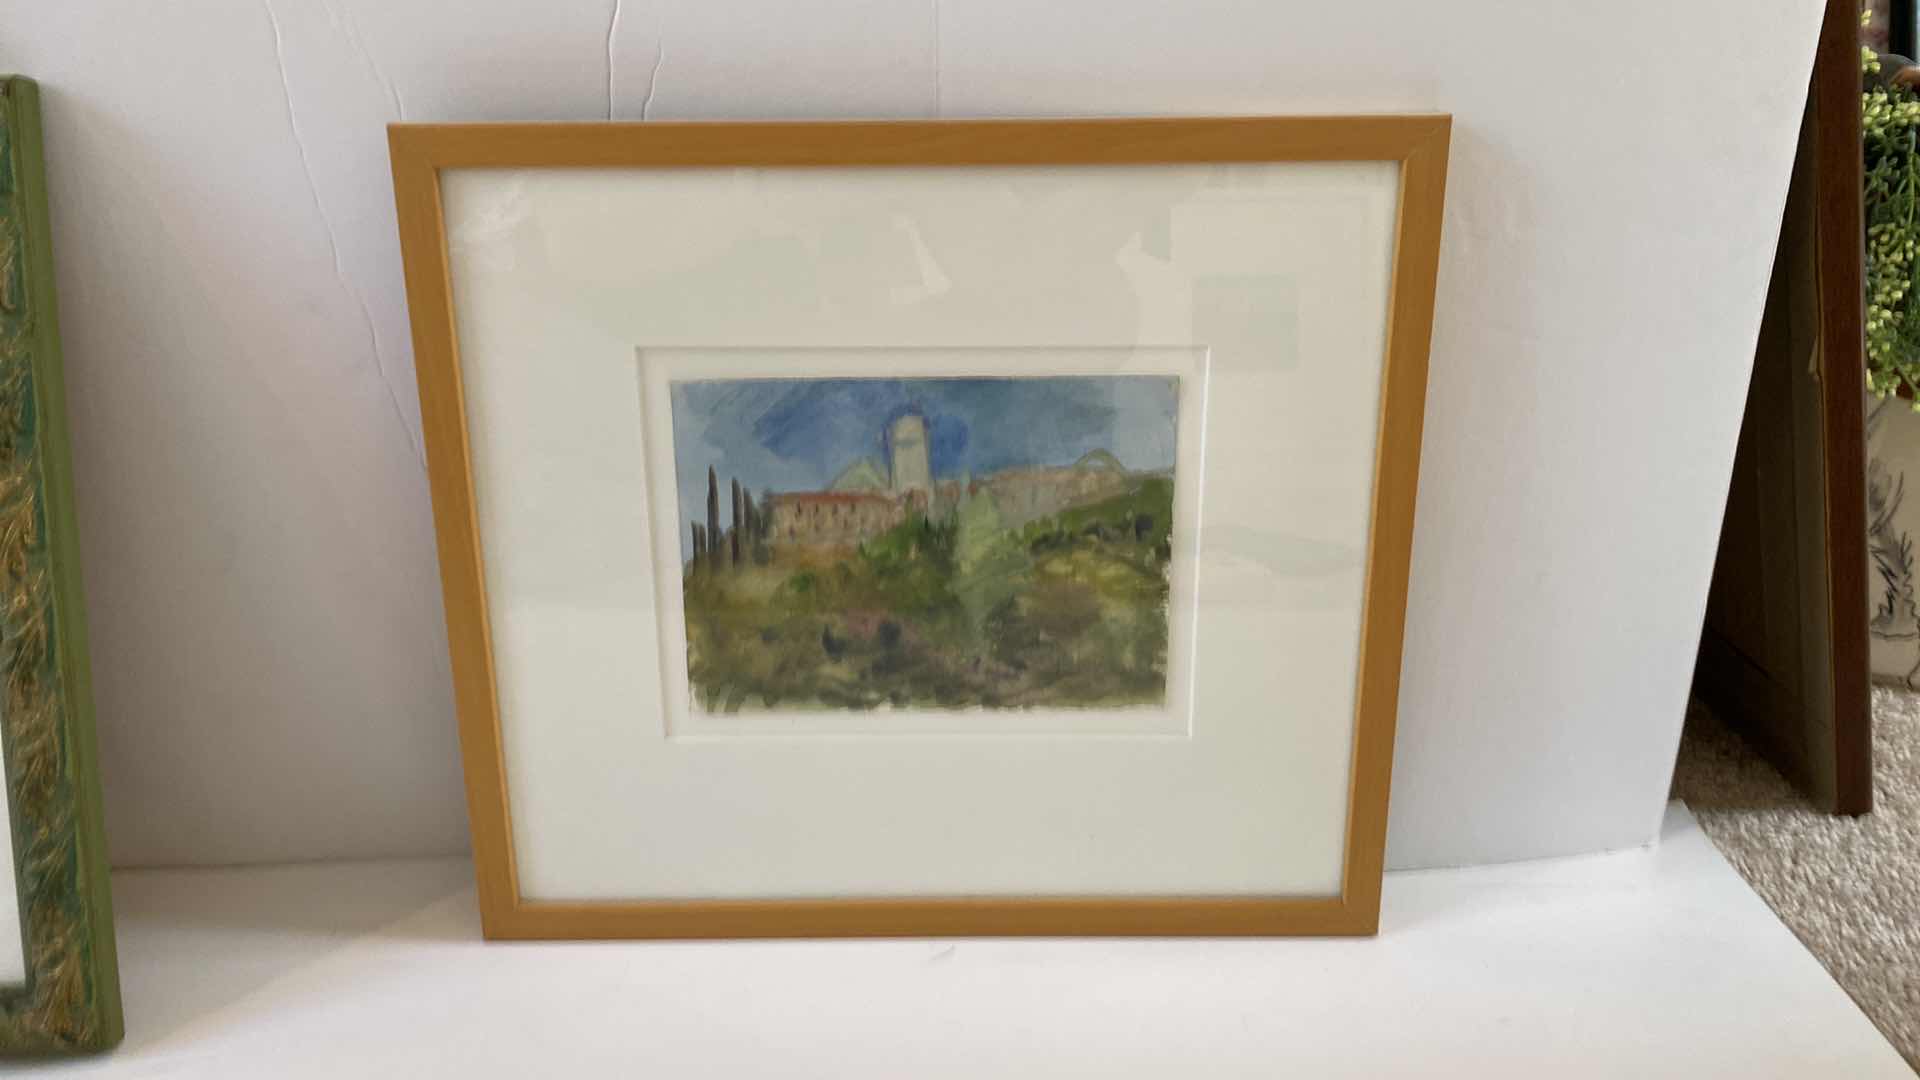 Photo 5 of FRAMED ART SIGNED HILLS AND TREES 16” x 13”